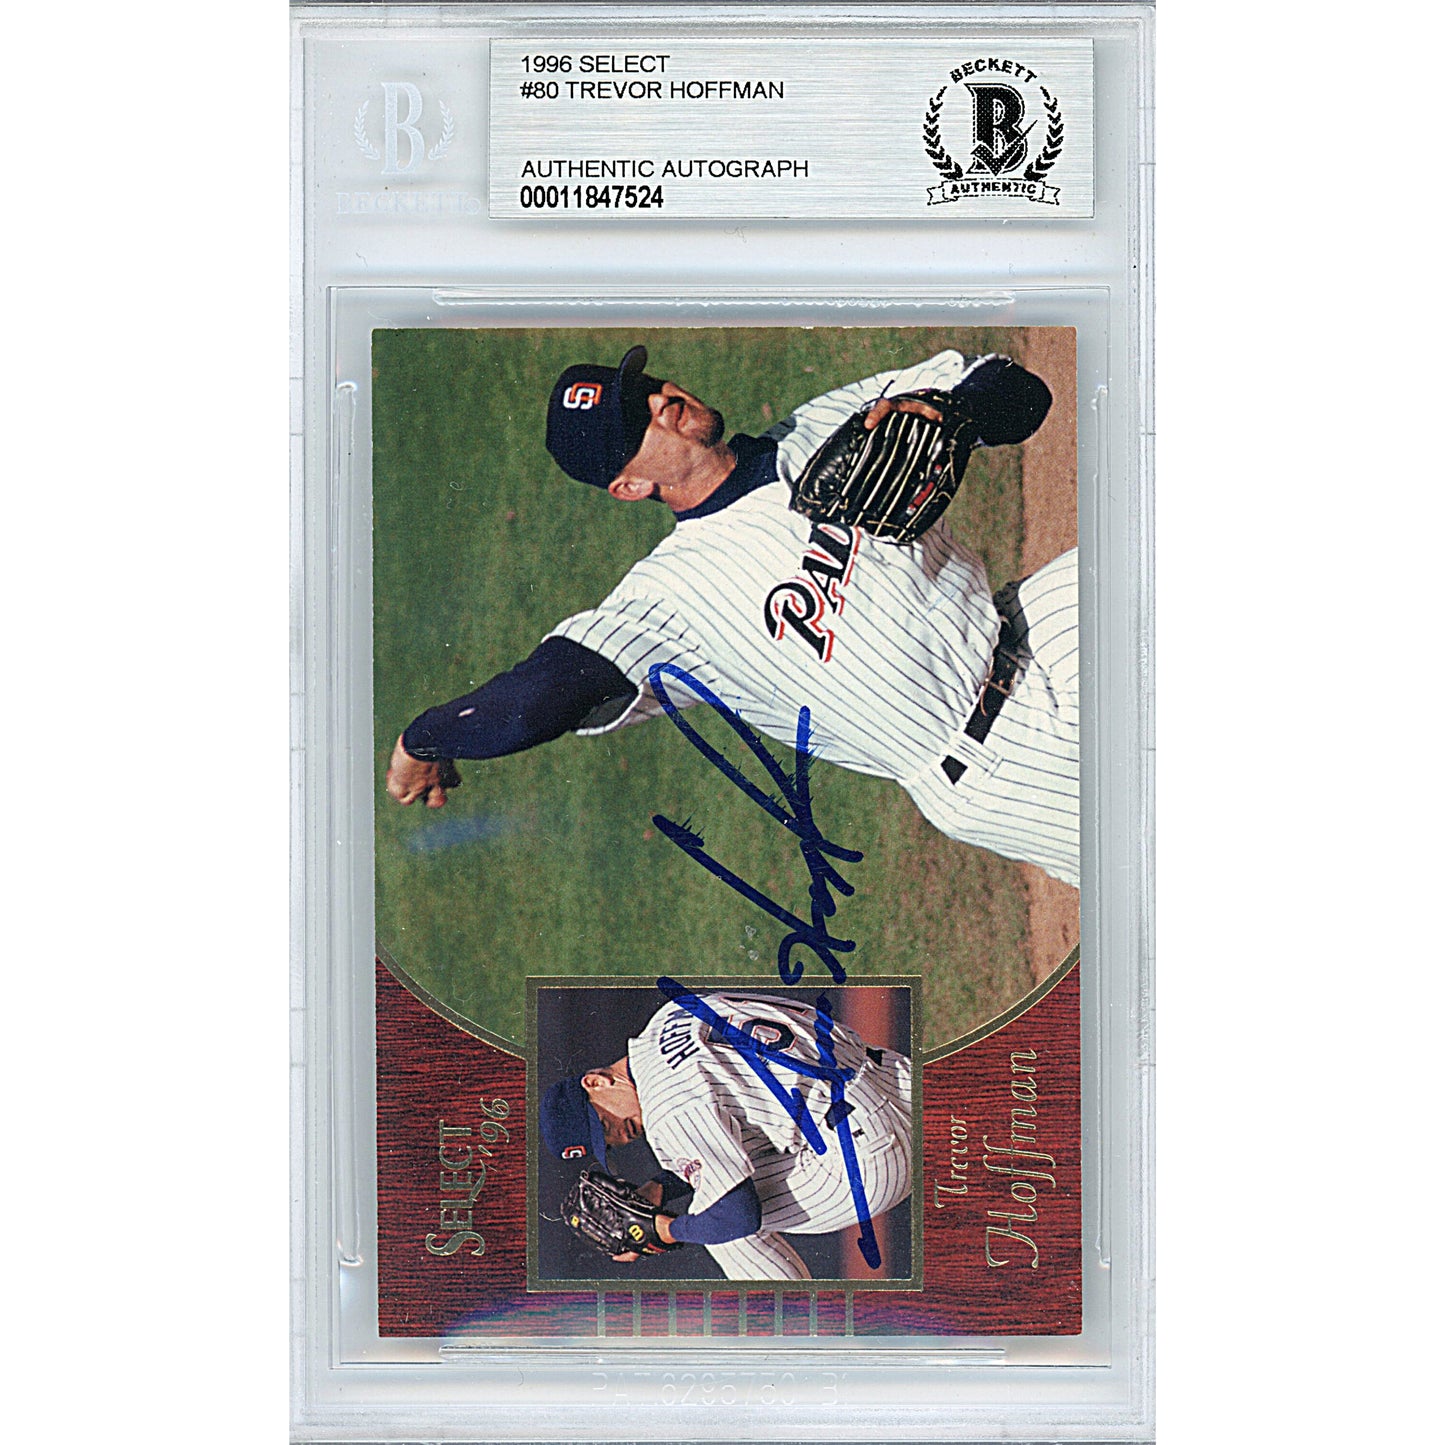 Baseballs- Autographed- Trevor Hoffman Signed San Diego Padres 1996 Pinnacle Select Baseball Trading Card- Beckett BAS BGS Authenticated - Slabbed- 00011847524 - 102